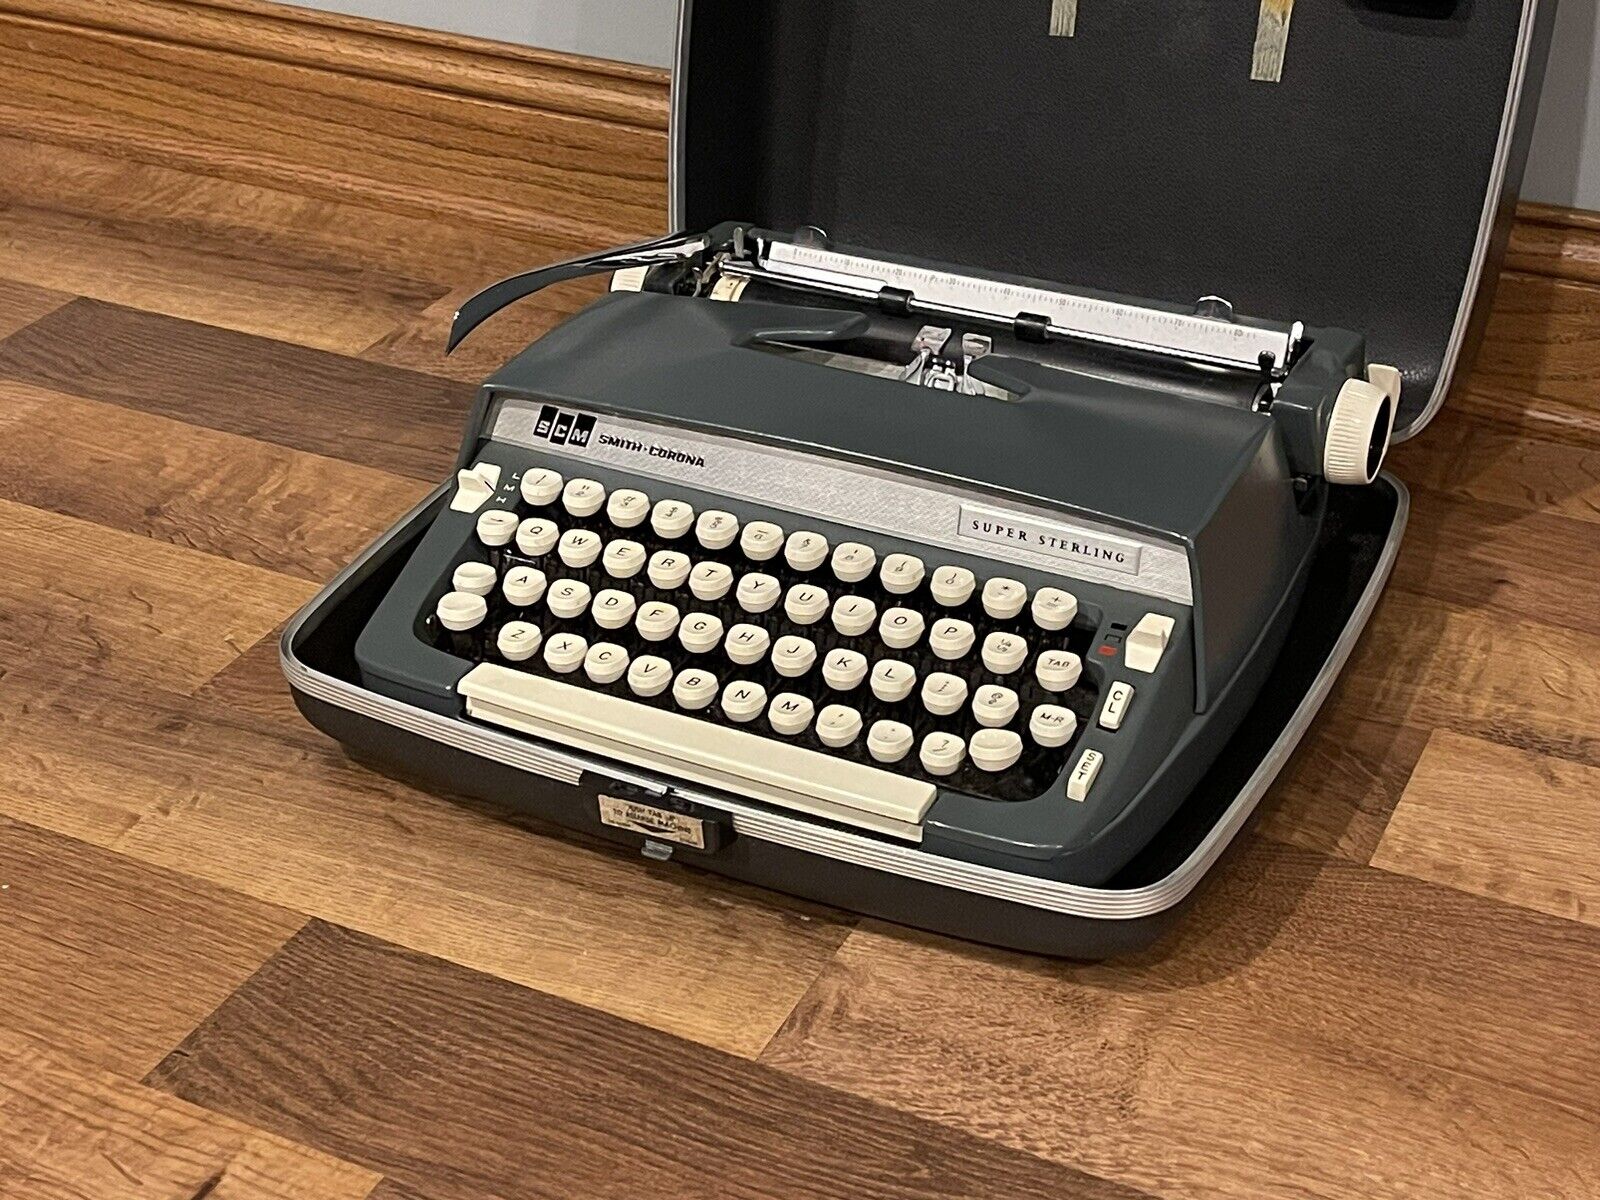 🔥 1960s Smith-Corona Super Sterling Portable Manual Typewriter w/ Case WORKS